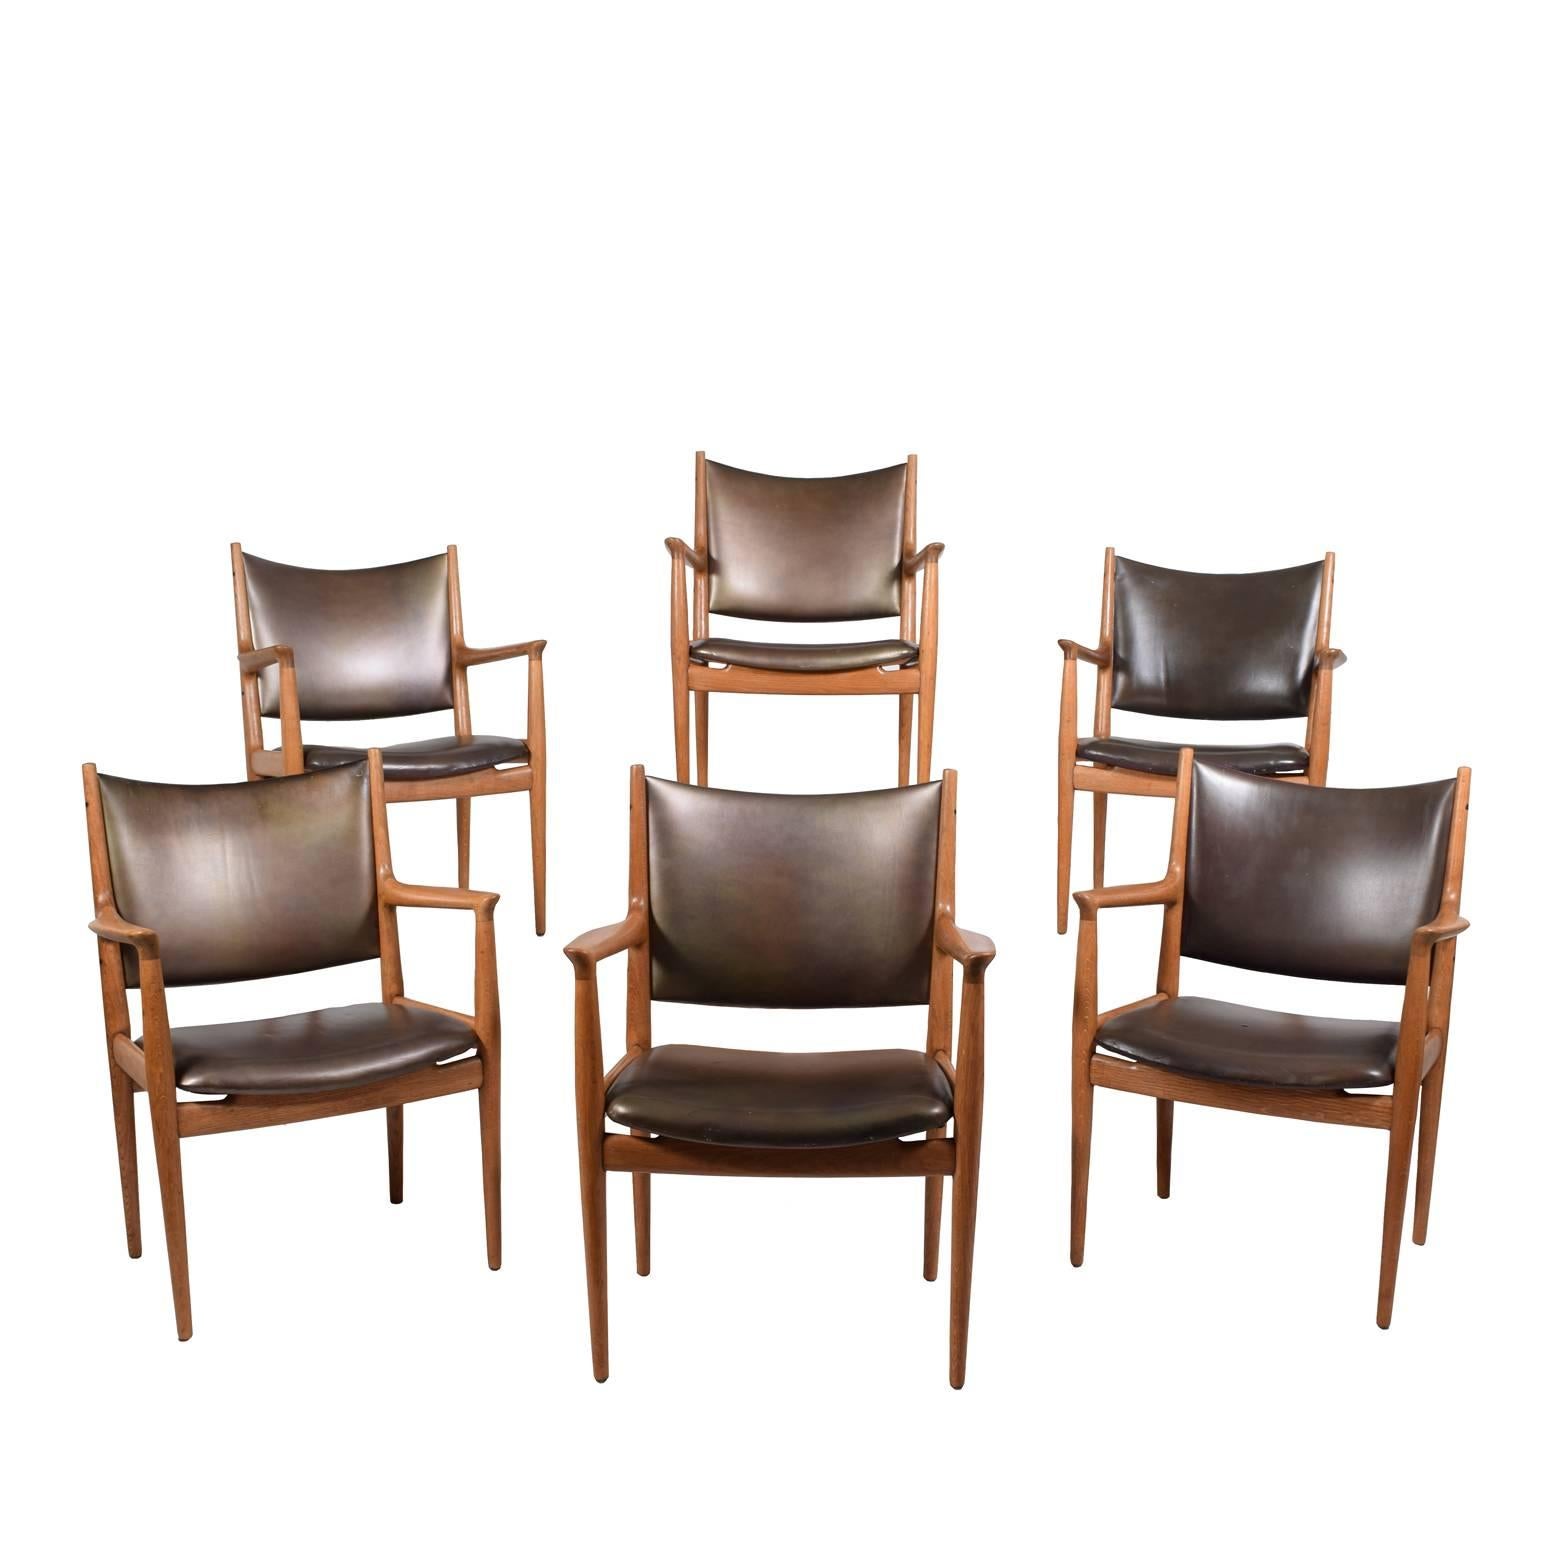 Solid oak and original leather upholstery. Set of six armchairs, designed in 1962.
 Measures: Arm height 27